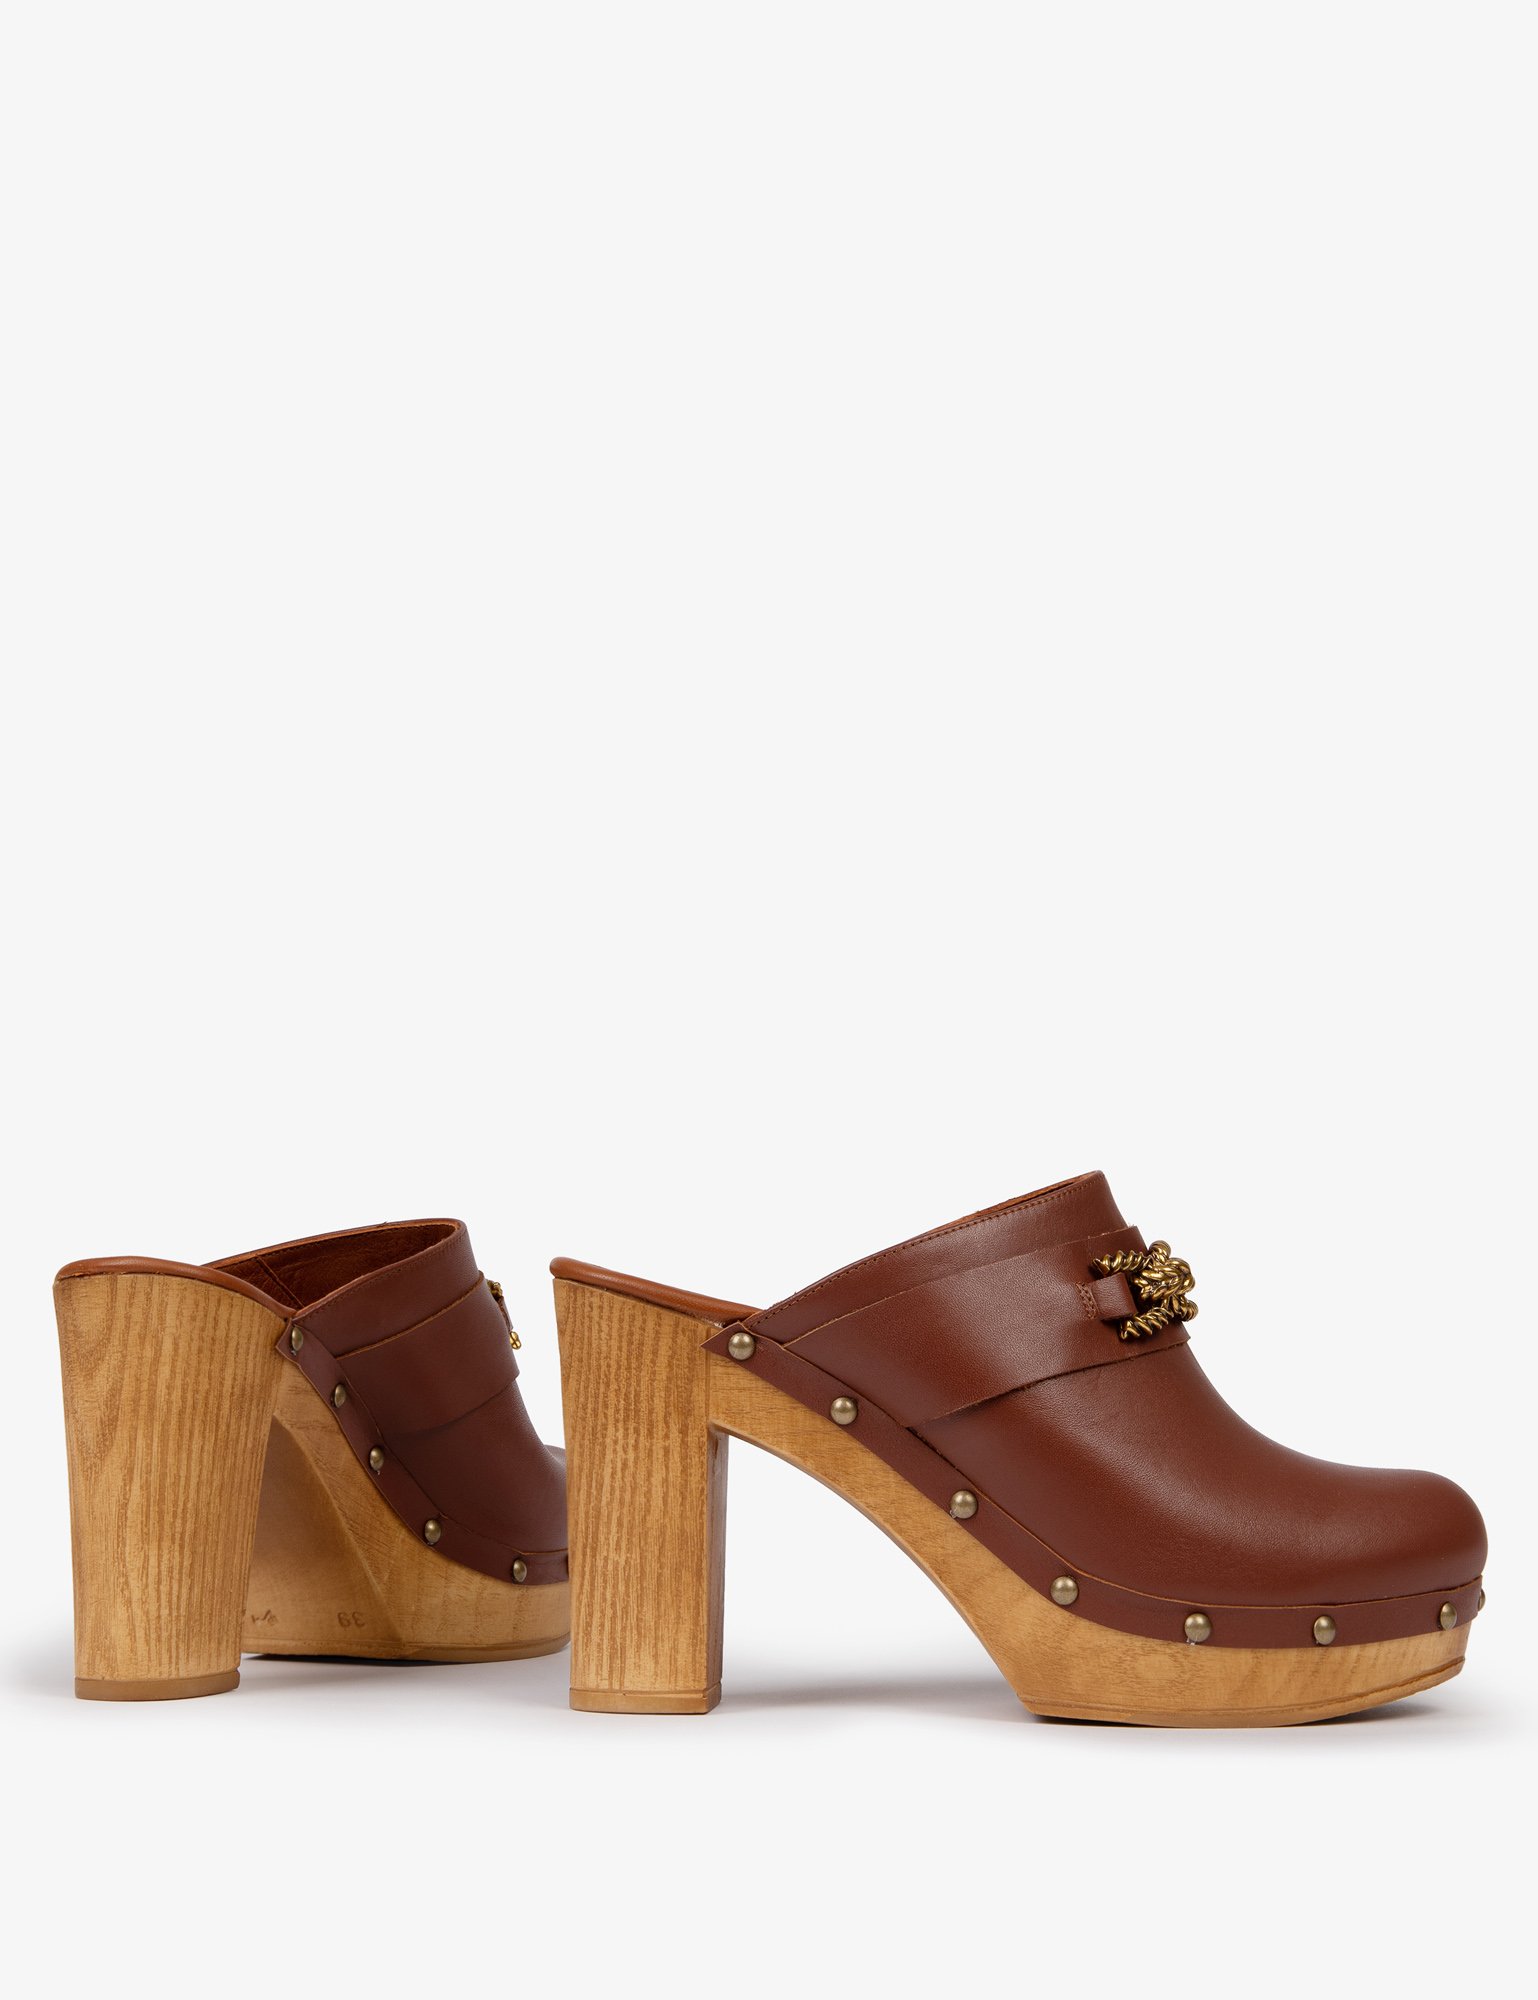 High Barley Twist Leather Clog | Women's Clog|Penelope Chilvers